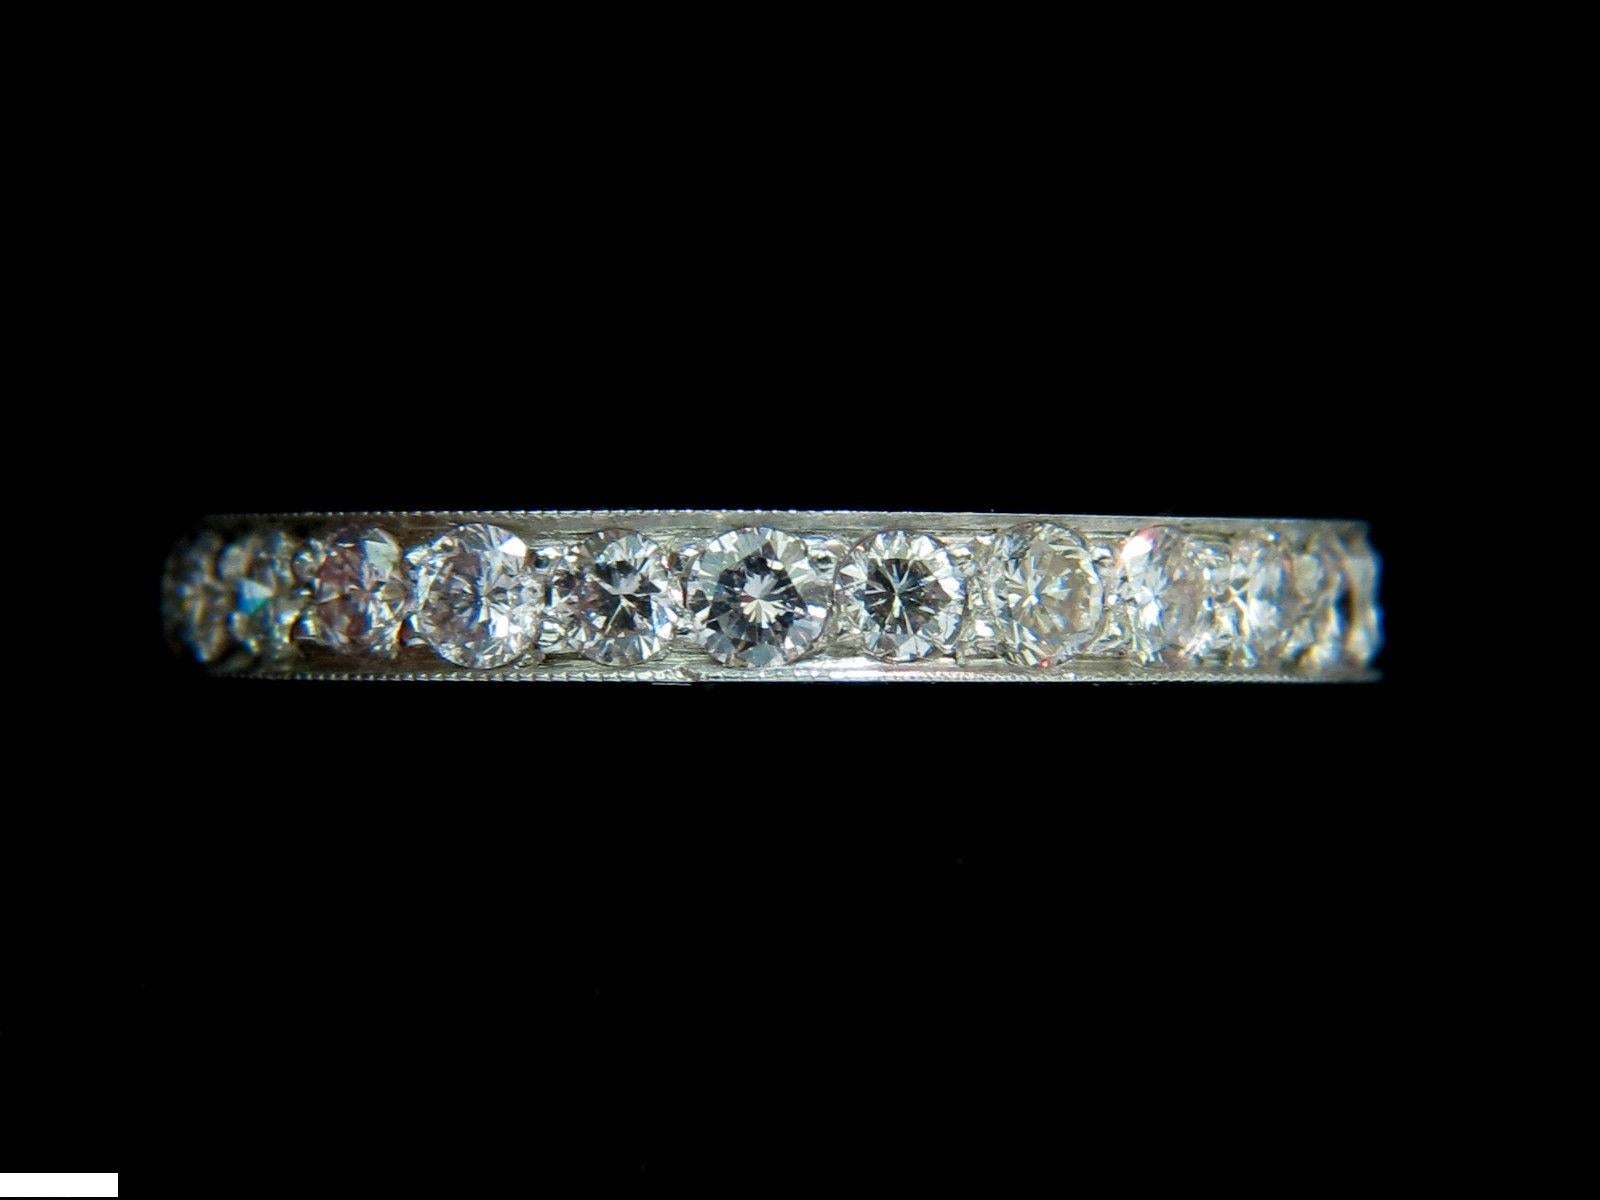 The classic Pave eternity 

Size: 6.5

2.8mm thick


Diamonds: 1.70ct. 

Rounds & full cuts 
F-color 

 Si-1 clarity

14kt white gold.

I am not able to resize.

3.3 grams.

$4800 Appraisal report will accompany